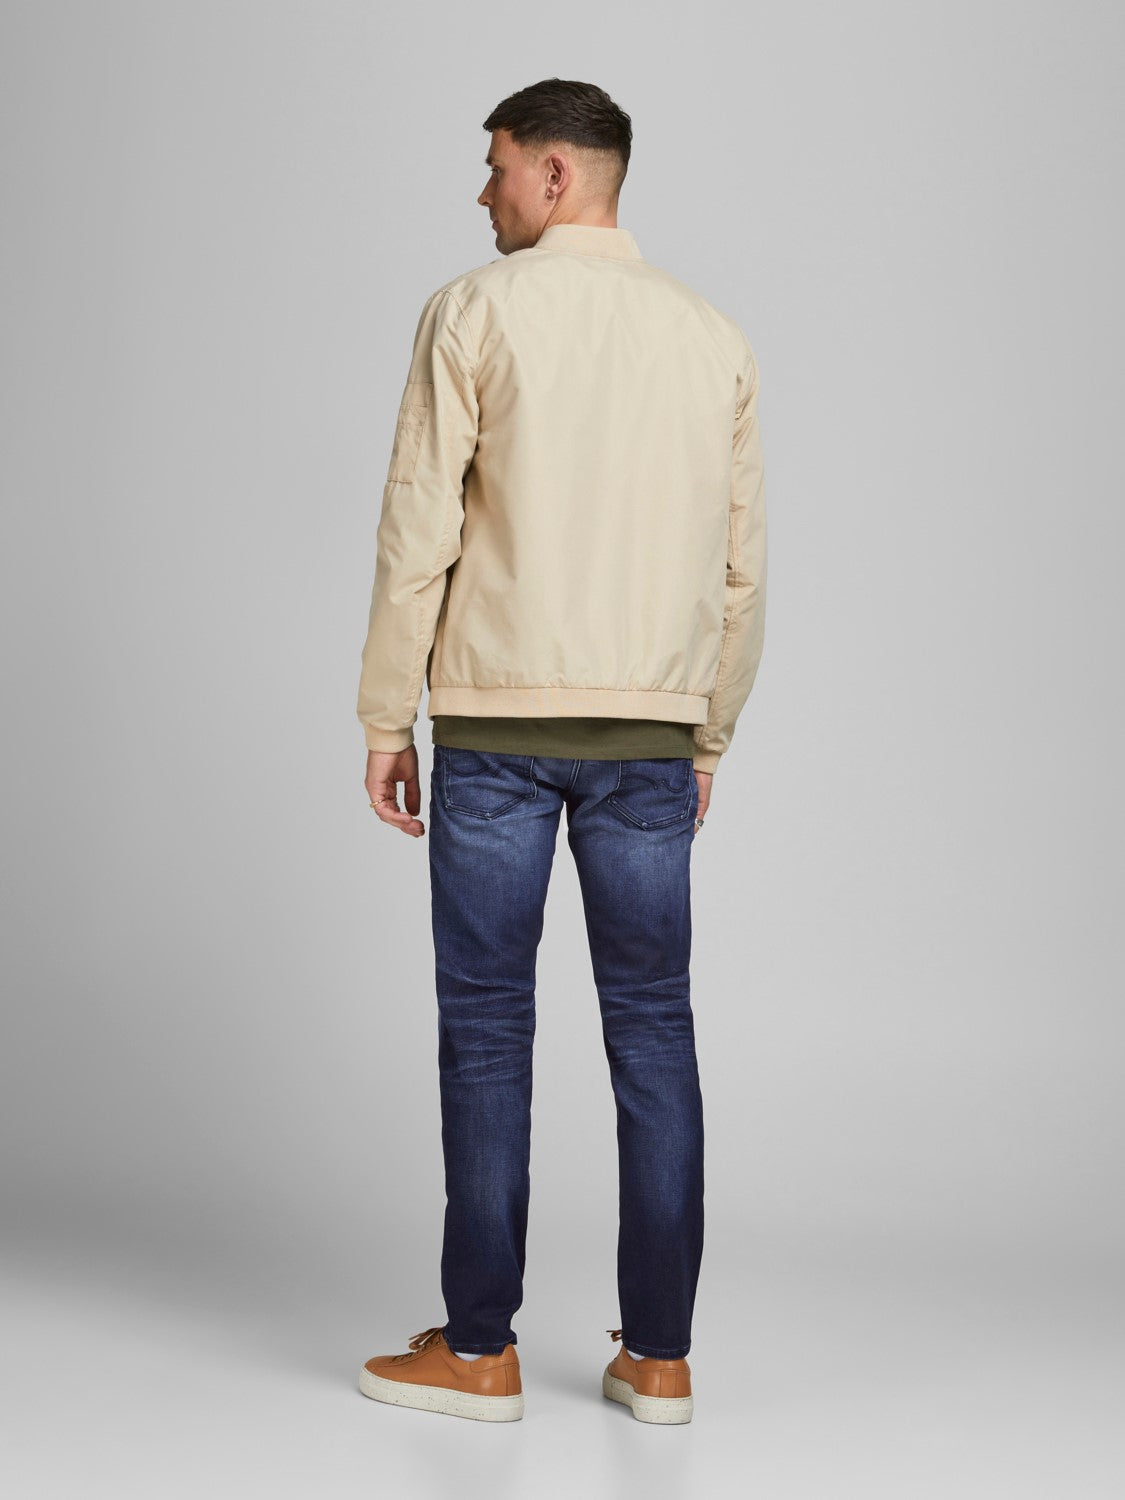 Mike 597 Comfort Fit Indigo Knit Jean-Back view